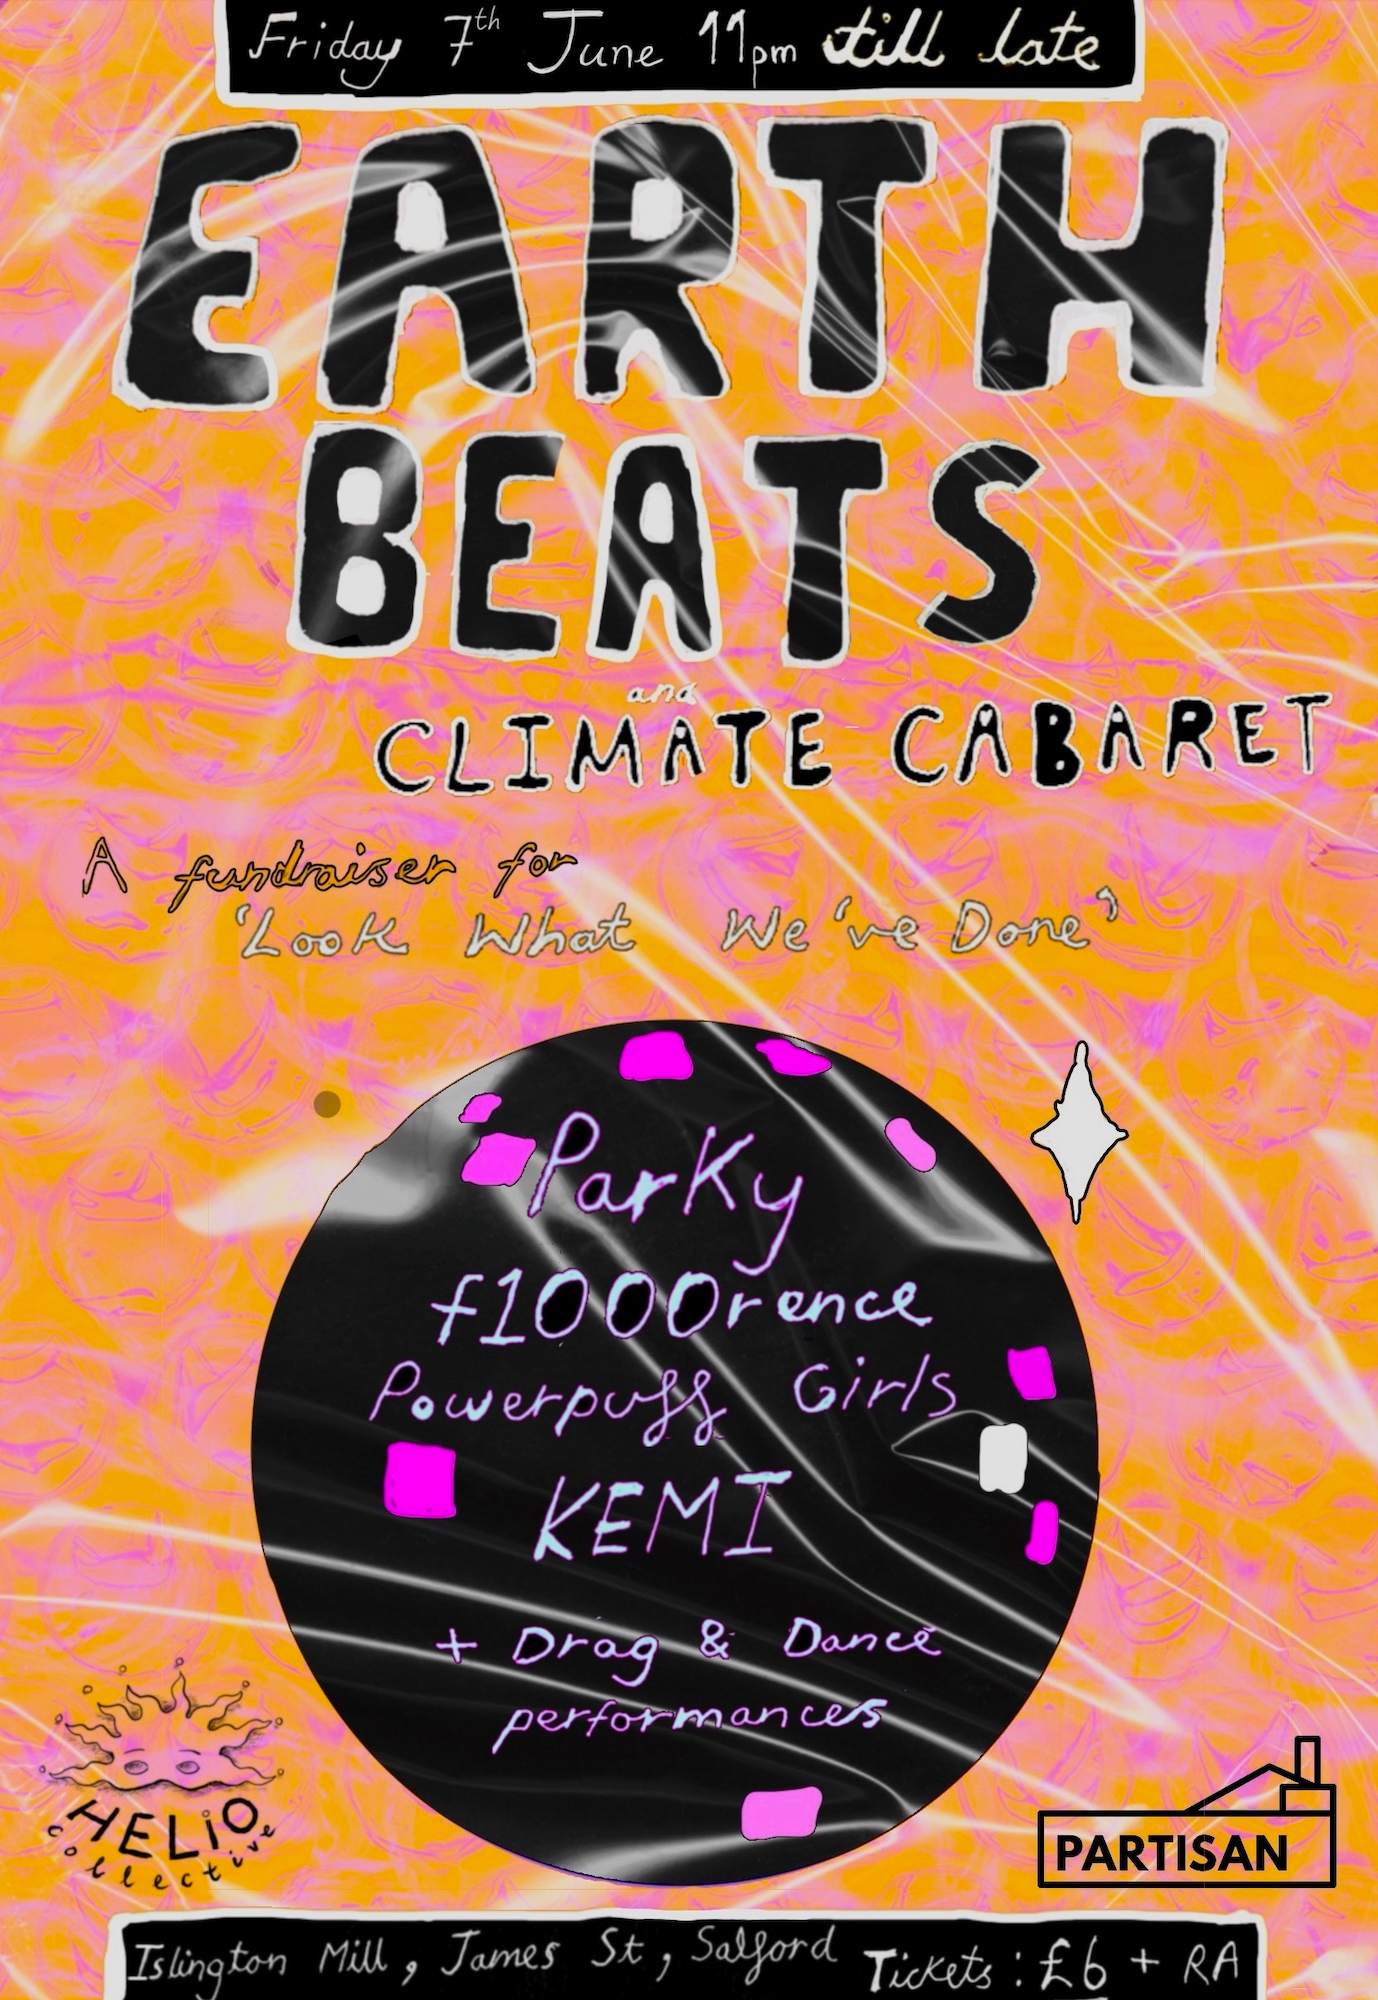 Earth Beats and Climate Cabaret - Página frontal